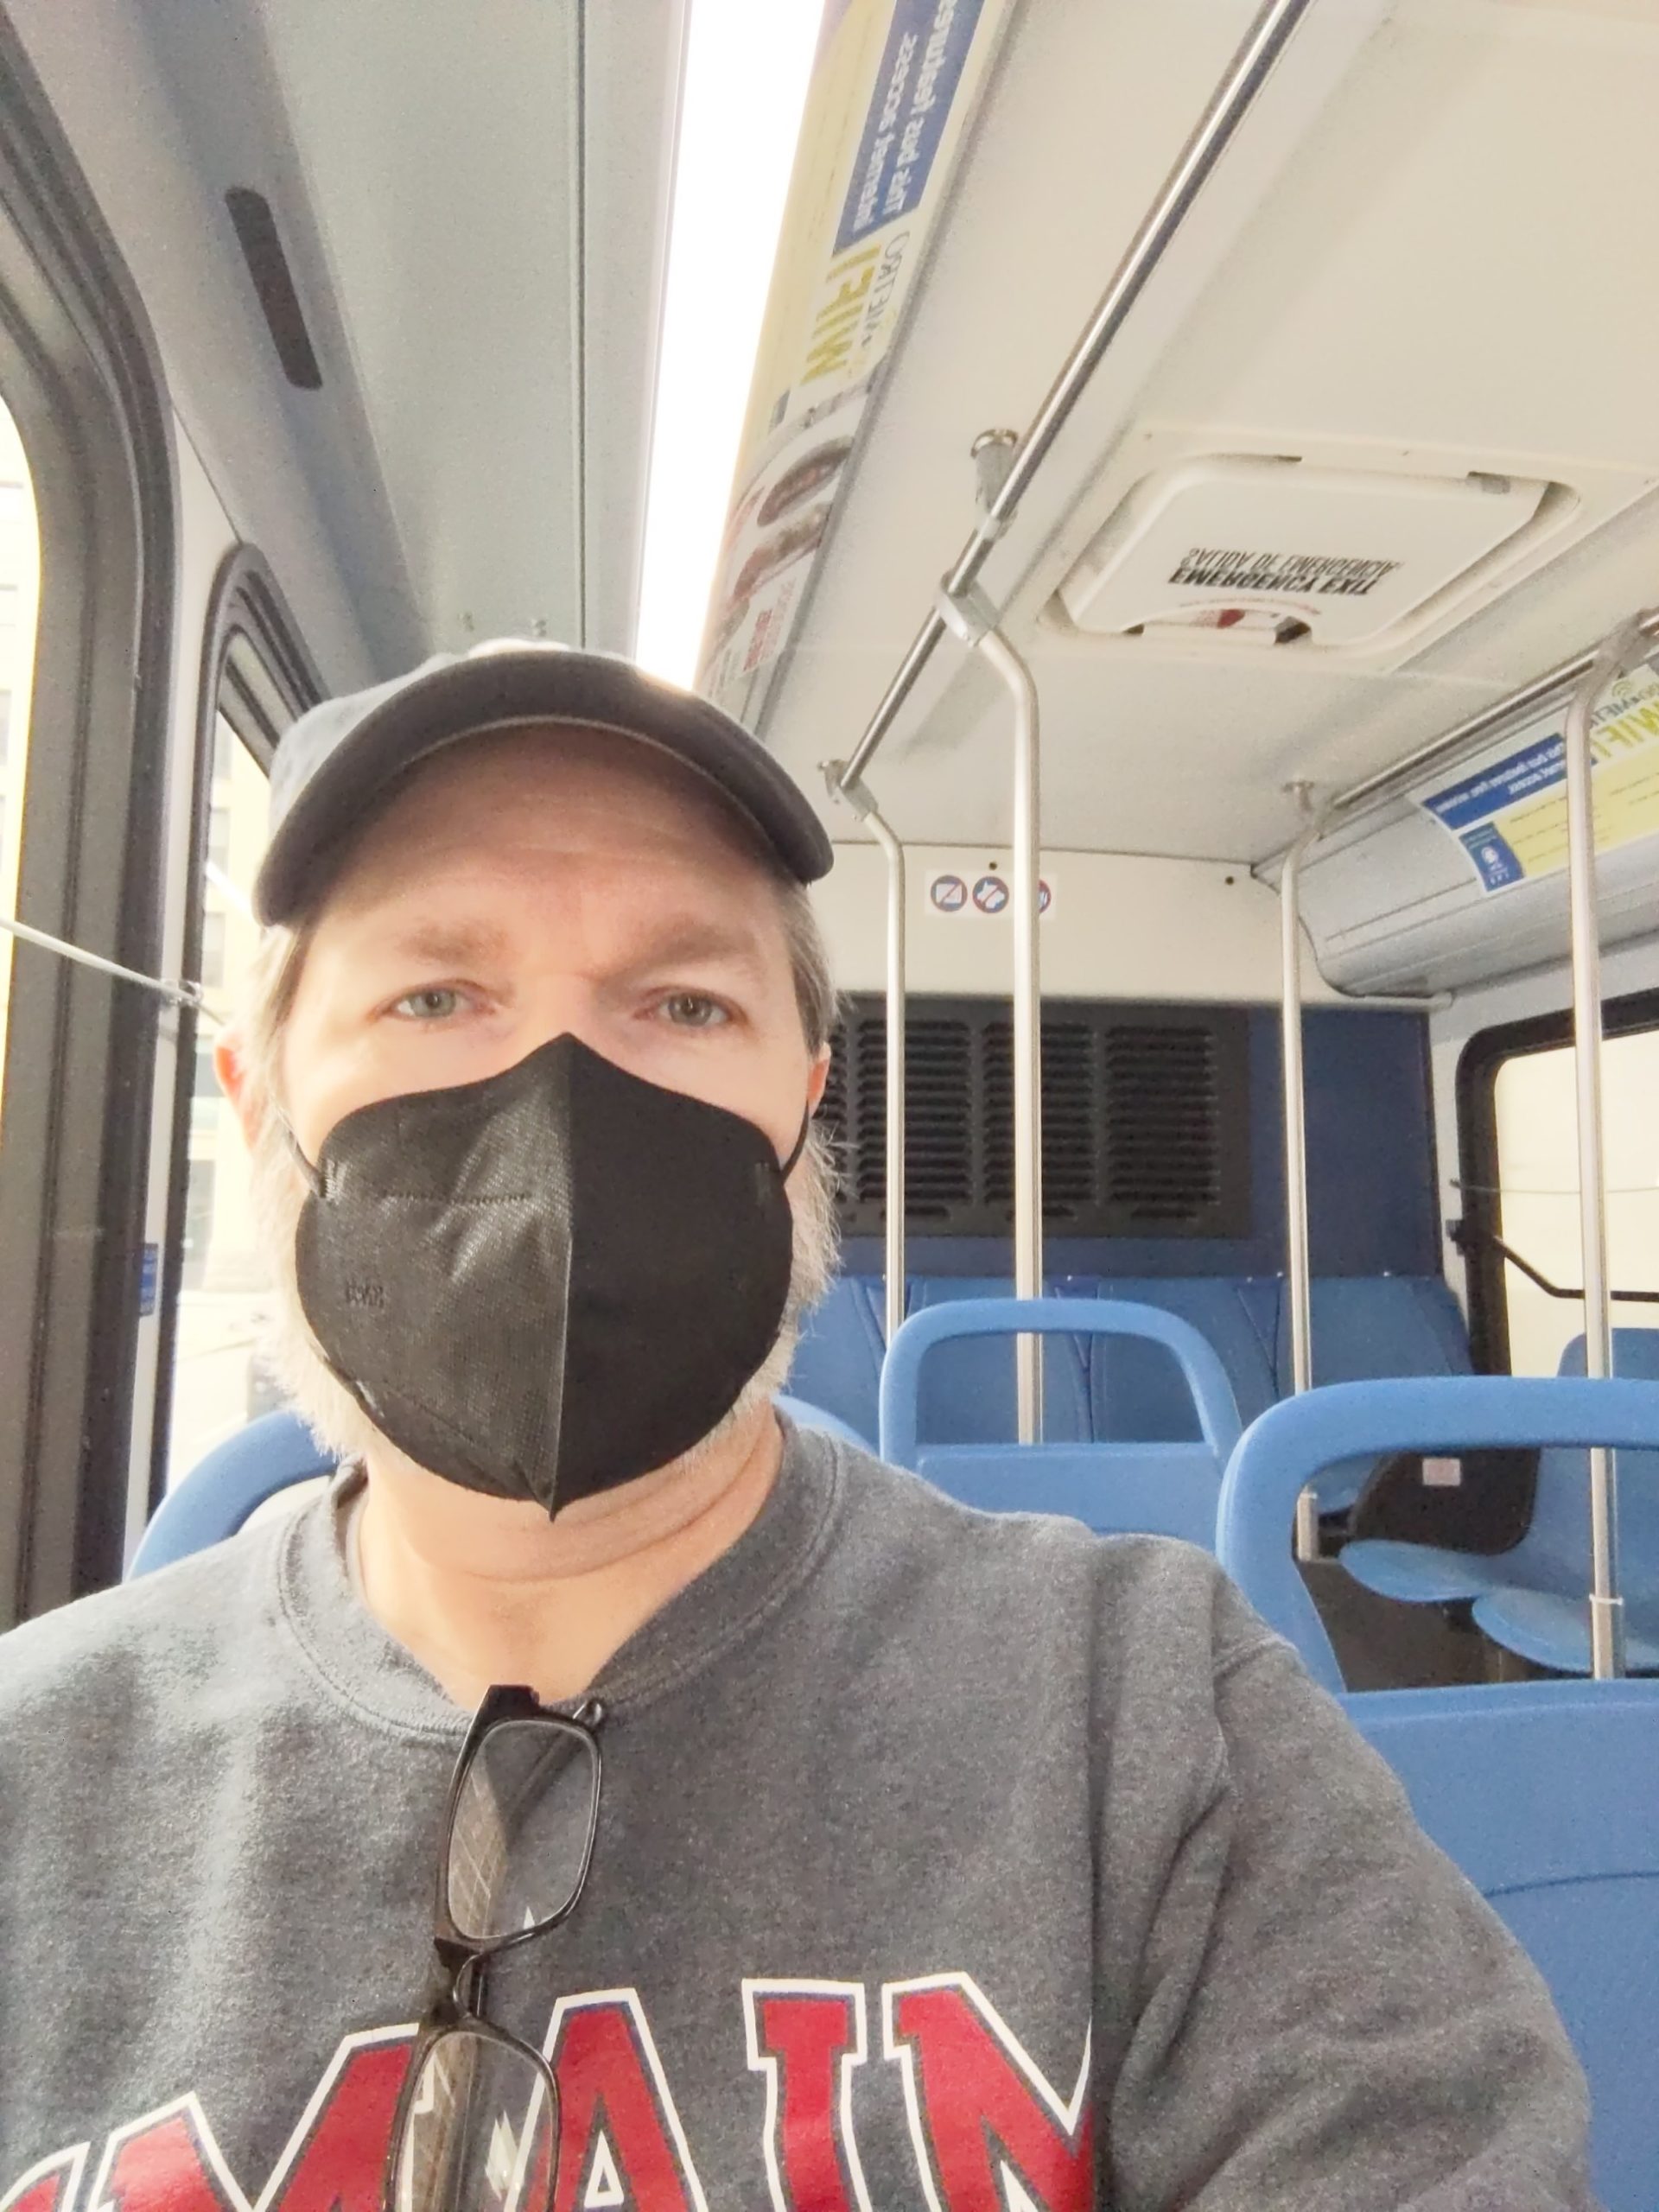 Should I Stop Wearing A Mask? A Practical Guide to Surviving this Moment in the COVID Pandemic